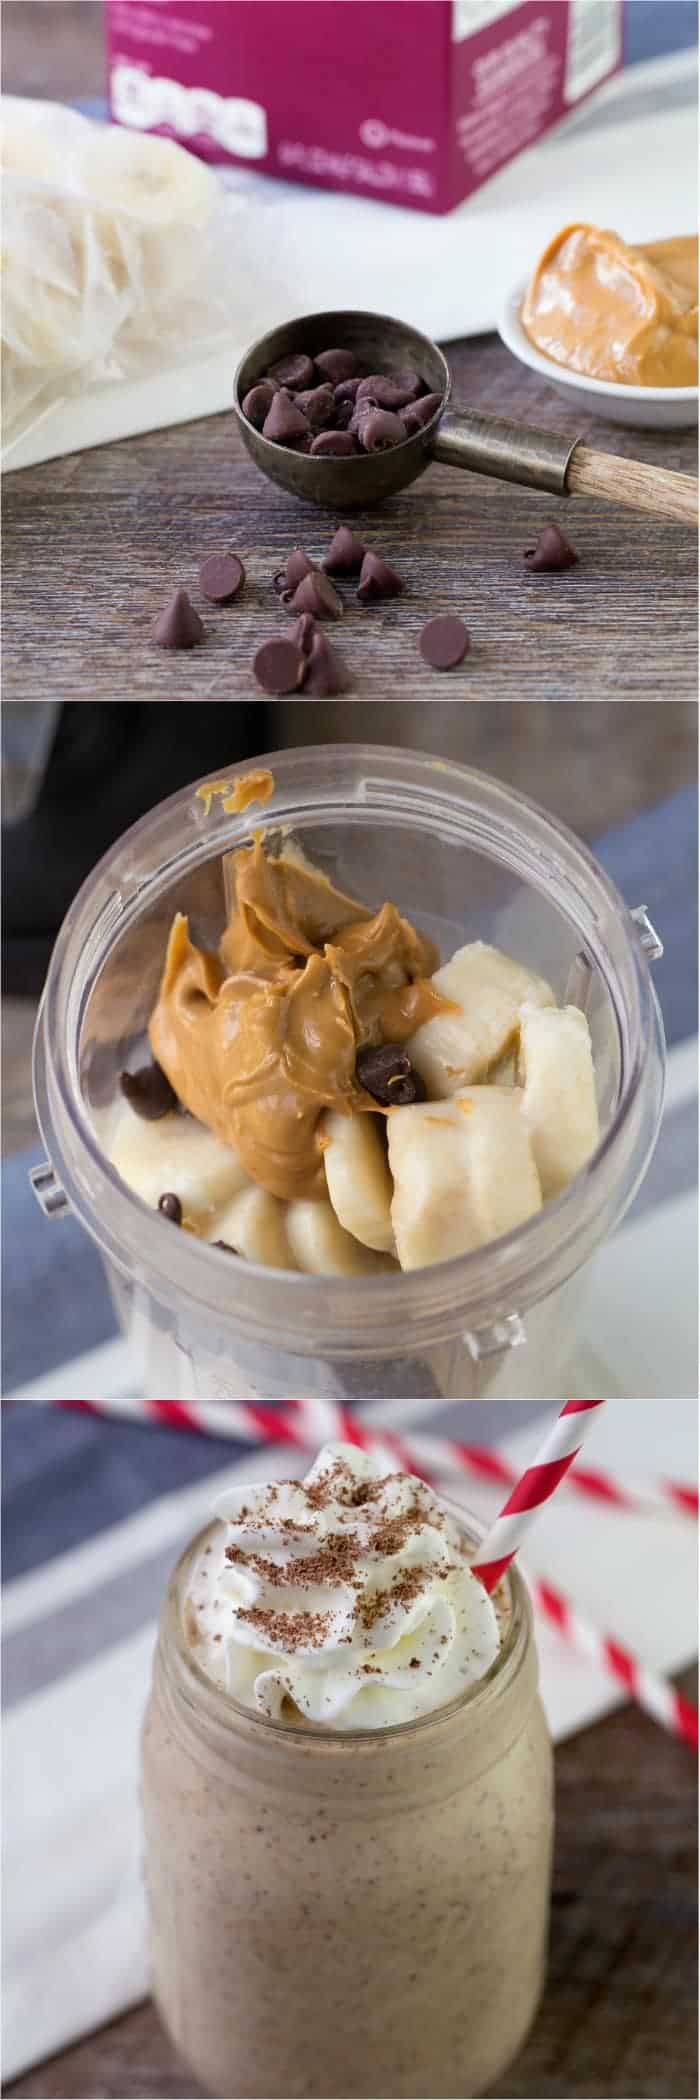 A blender cup filled with bananas peanut butter and chocolate chips